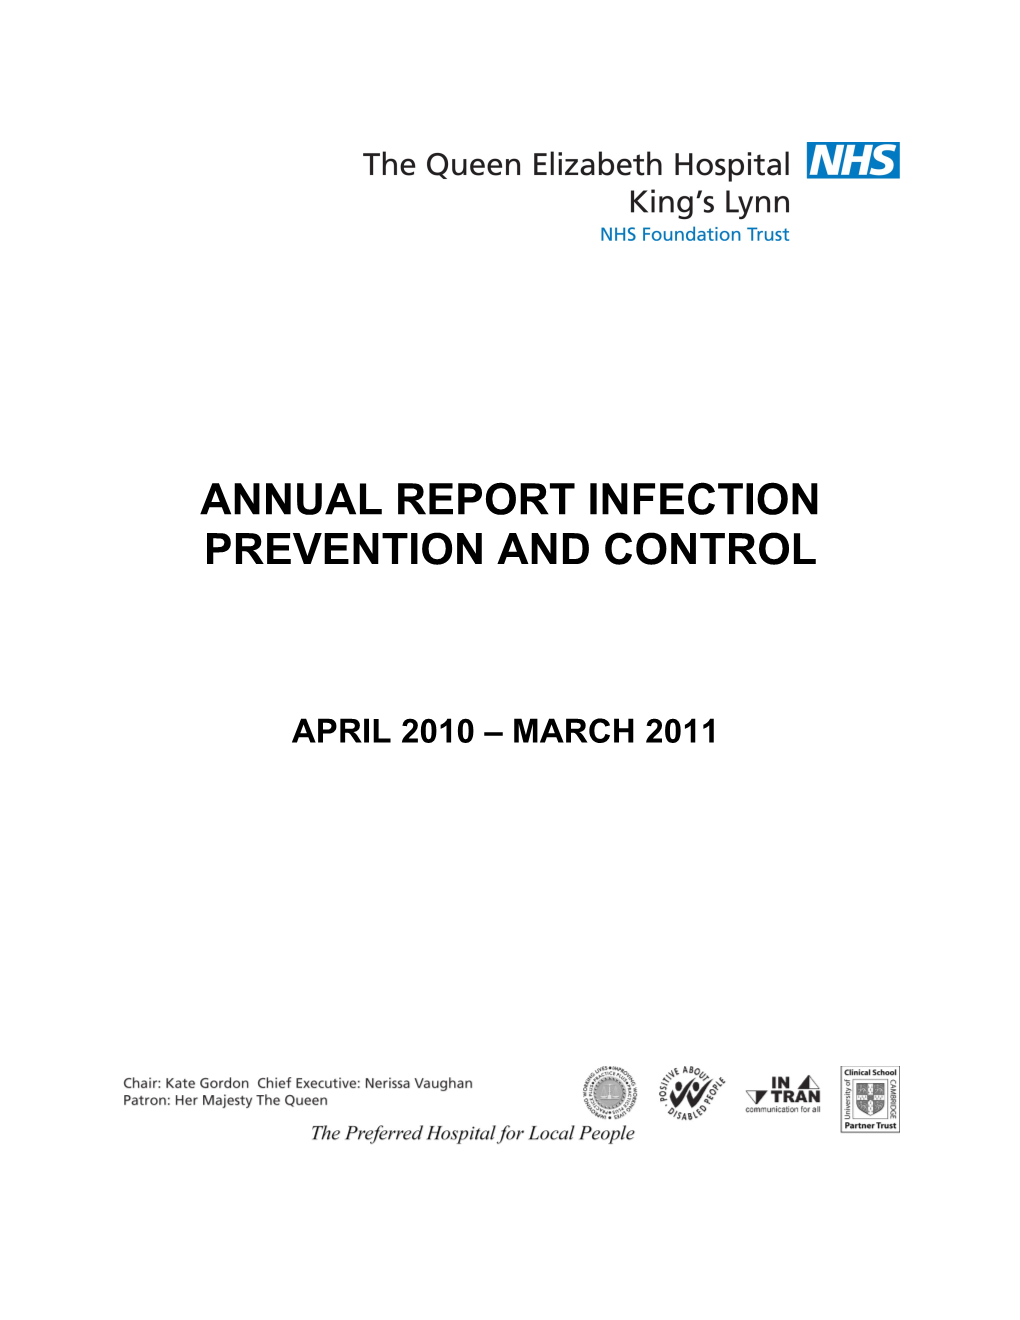 Annual Report Infection Prevention and Control